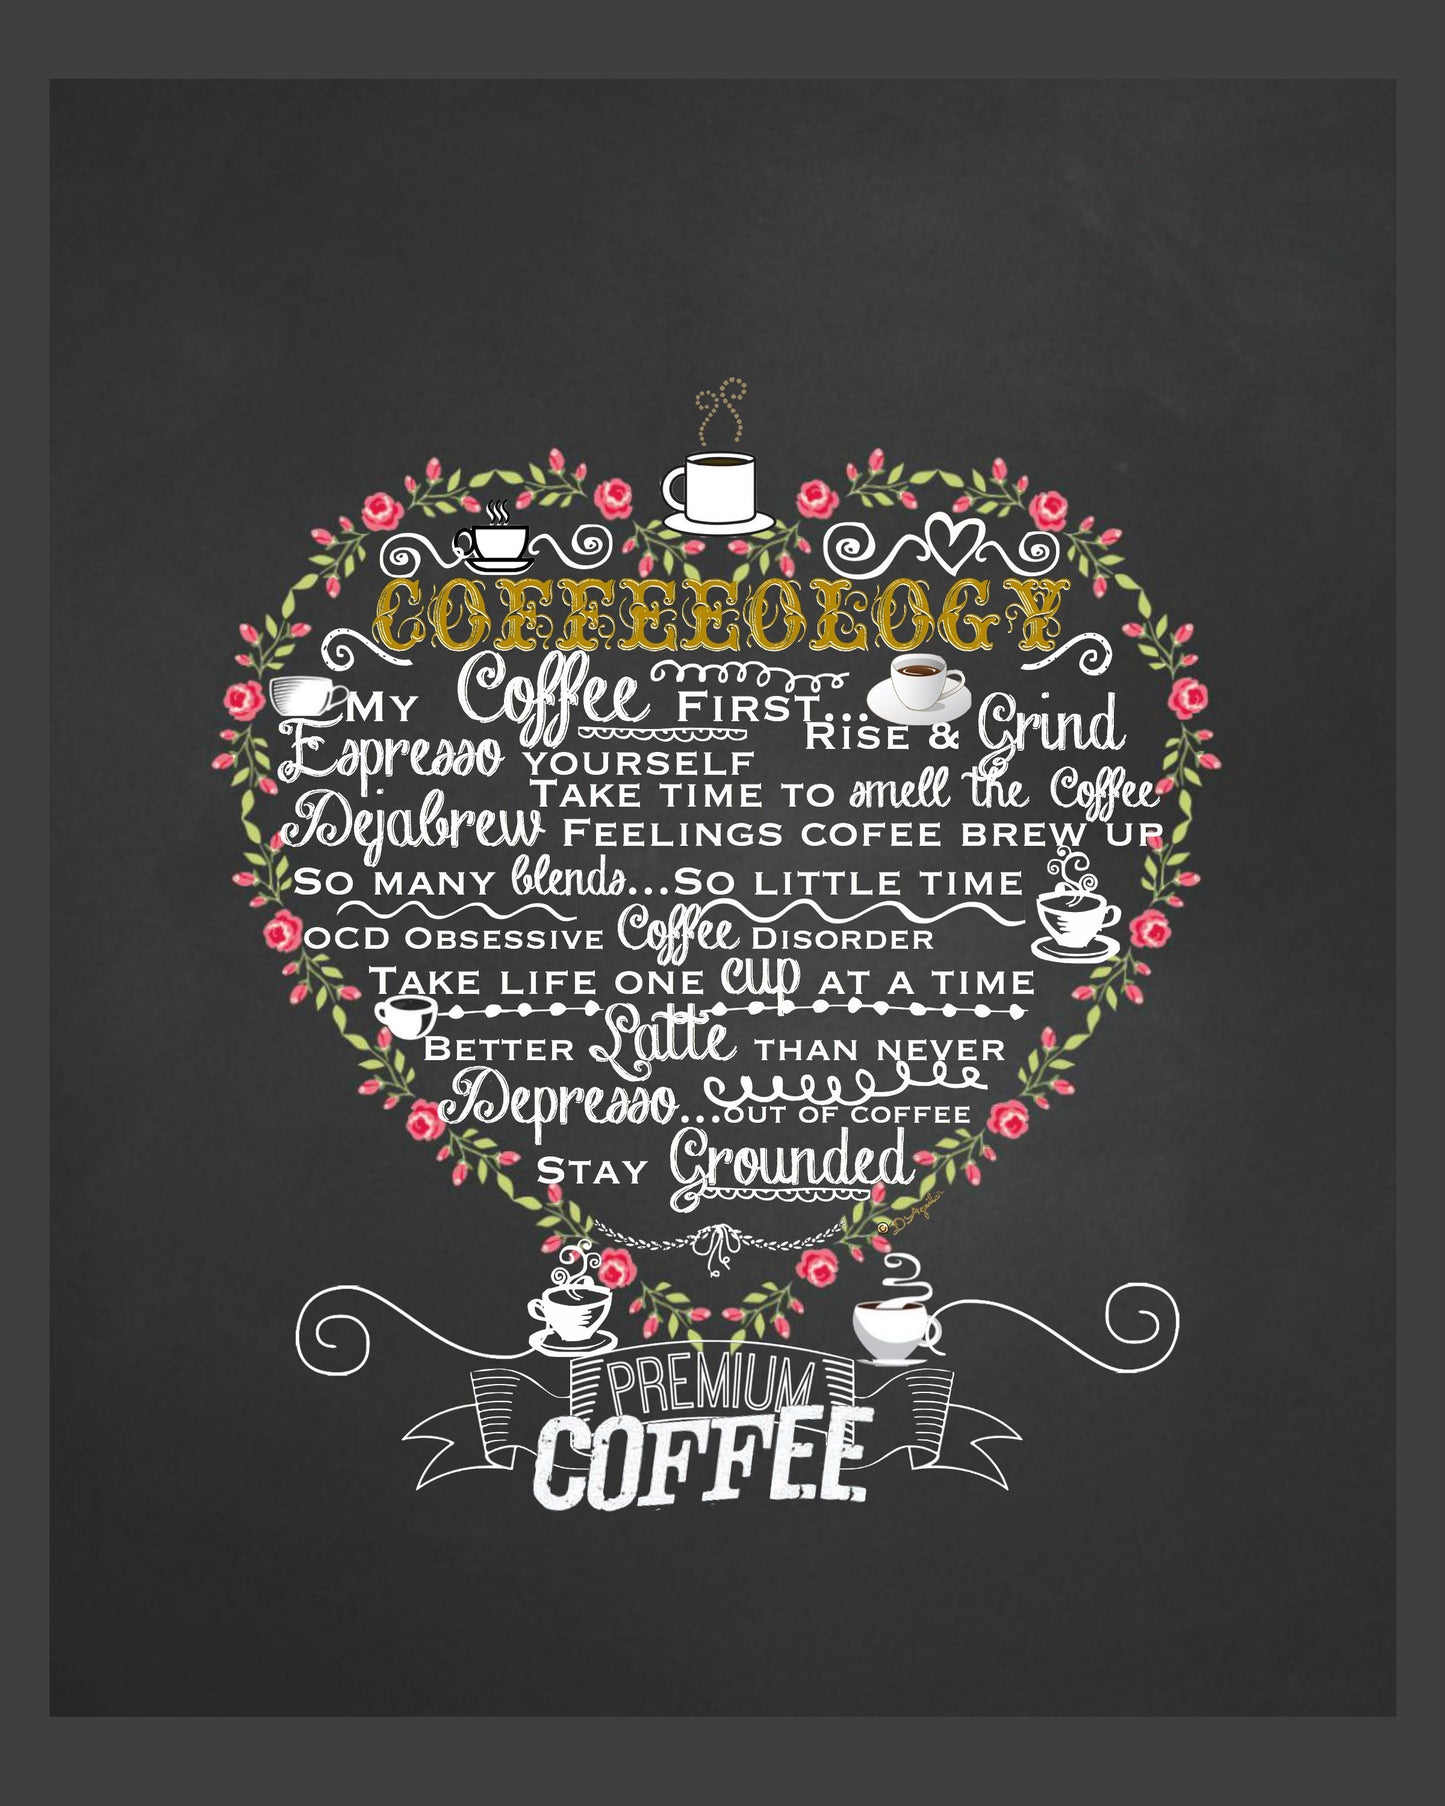 Coffeeology Coffee Lover 8x 10 Chalk Art Sign Print Ready To Frame -Kitchen, Cafe or Restaurant